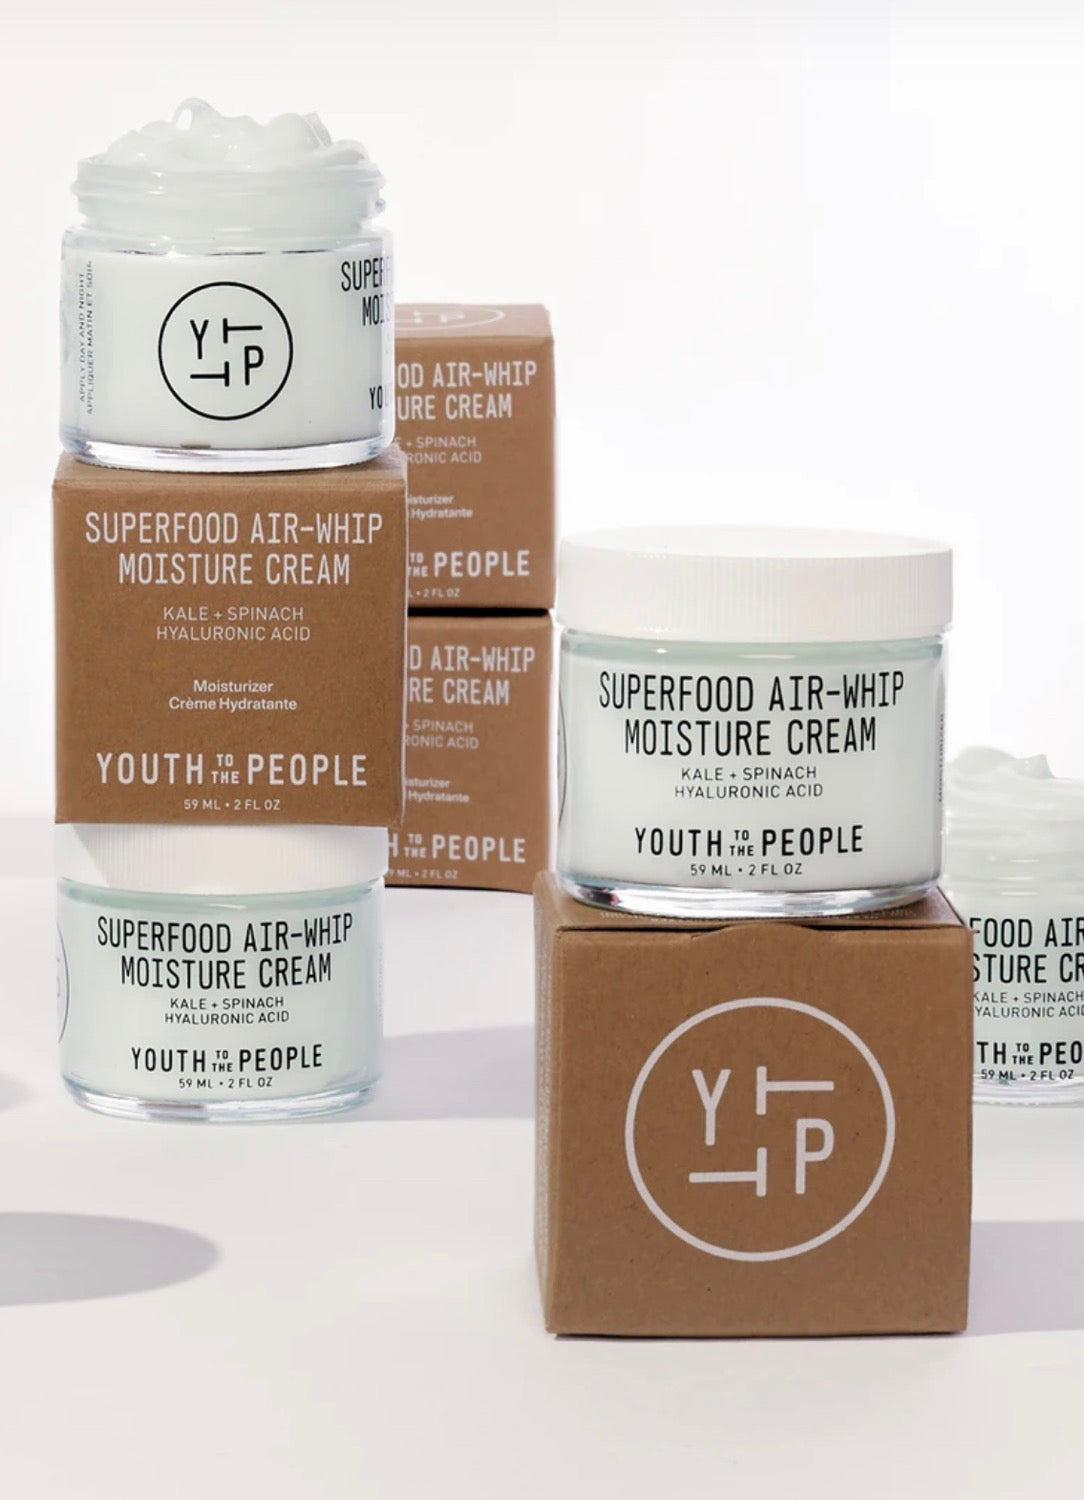 Youth to the People Superfood Air-Whip Moisture Cream 59ml